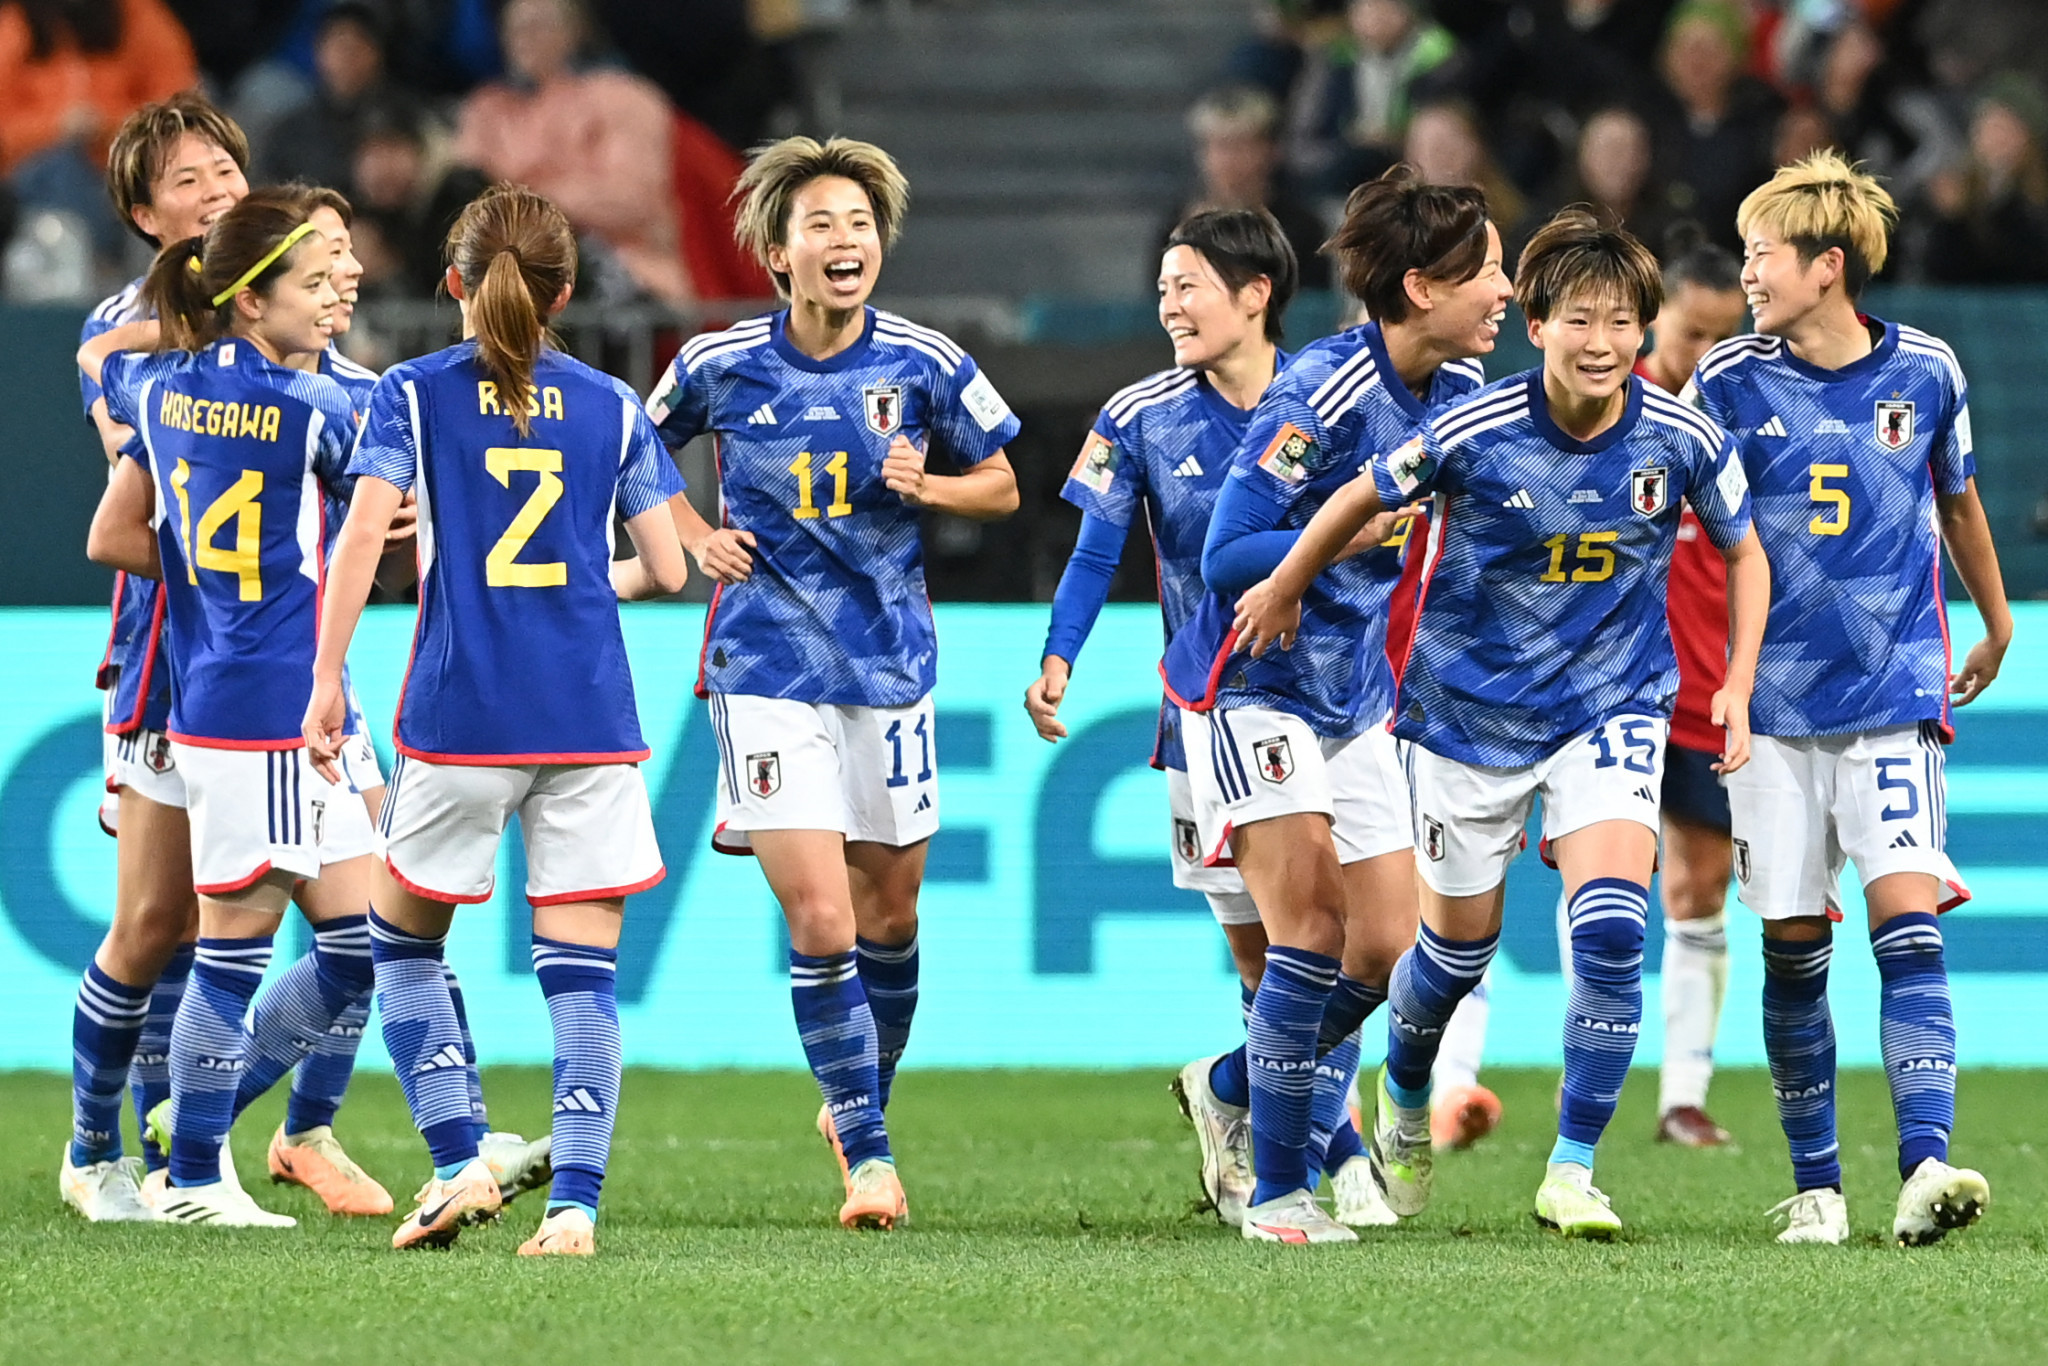 Aoba Fujino, second from right, became the first teenager to score for Japan at the Women's World Cup at 19 years of age ©Getty Images